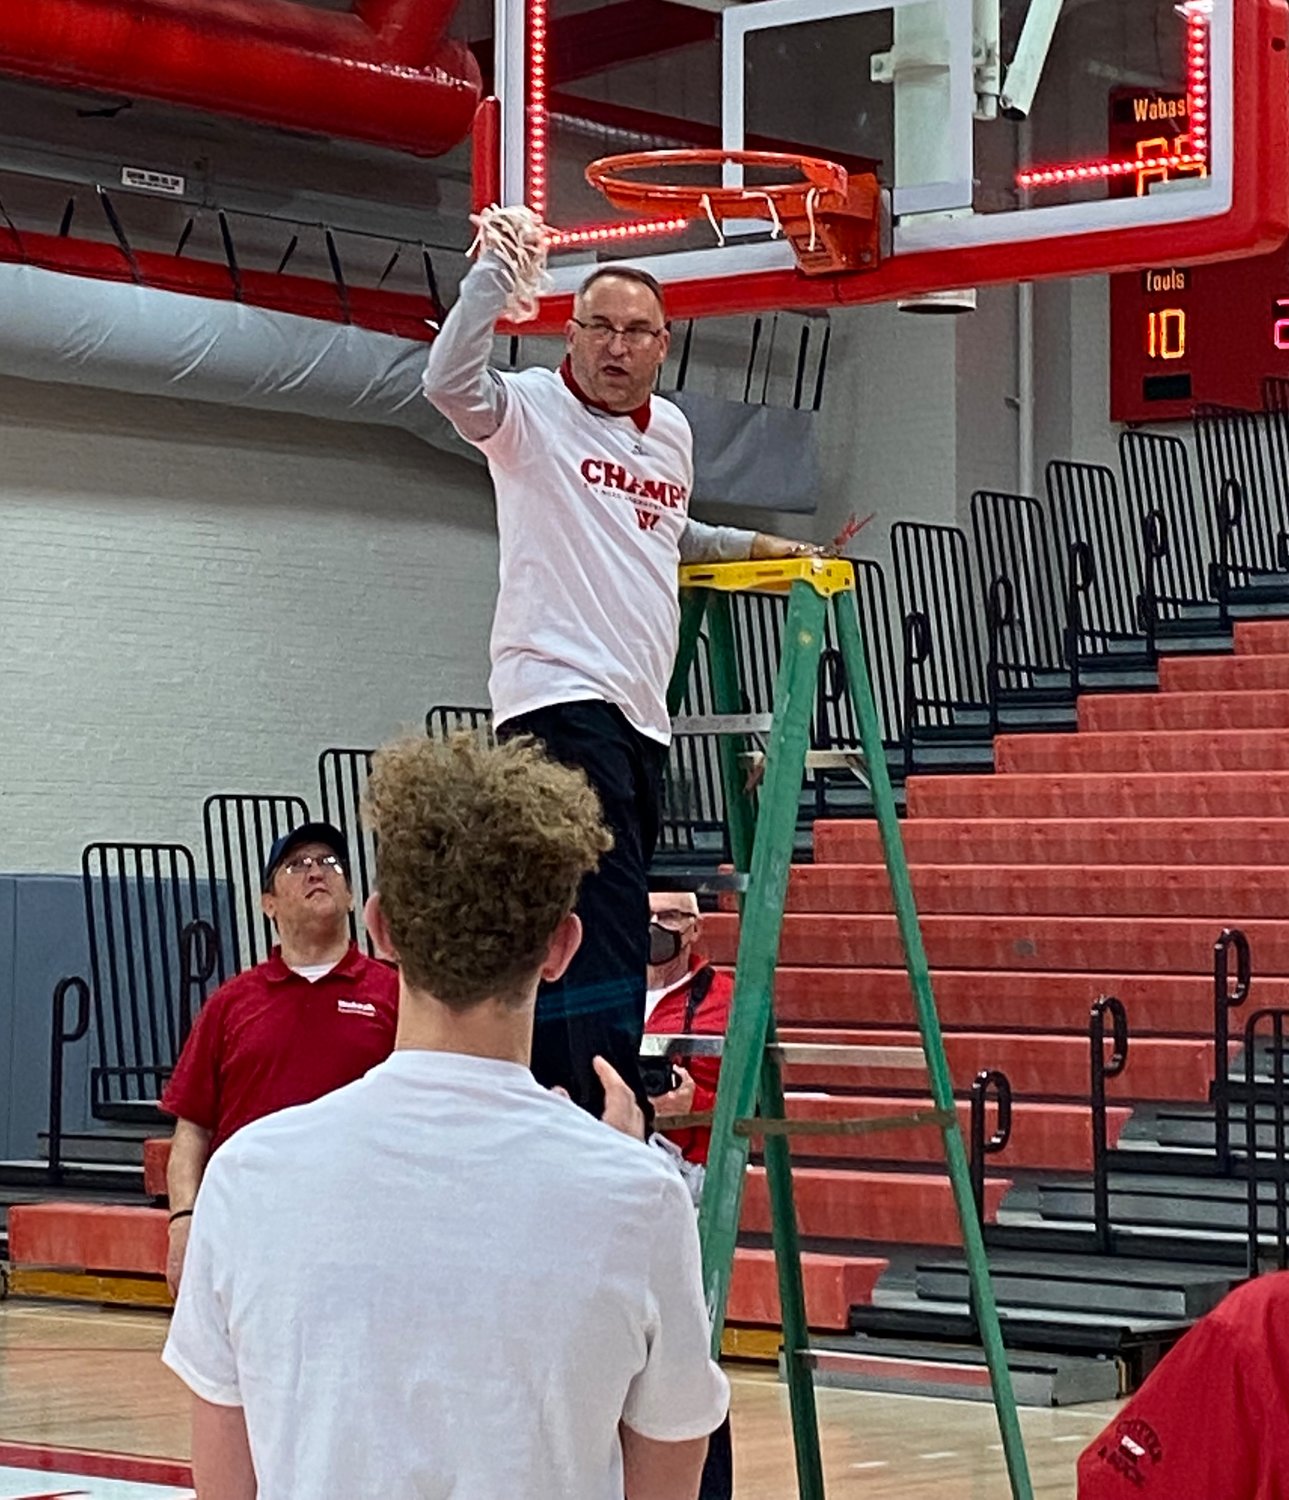 Wabash Coach Kyle Brumett cuts down the nets after the Little Giants were crowned the champions of the North Coast Athletic Conference.